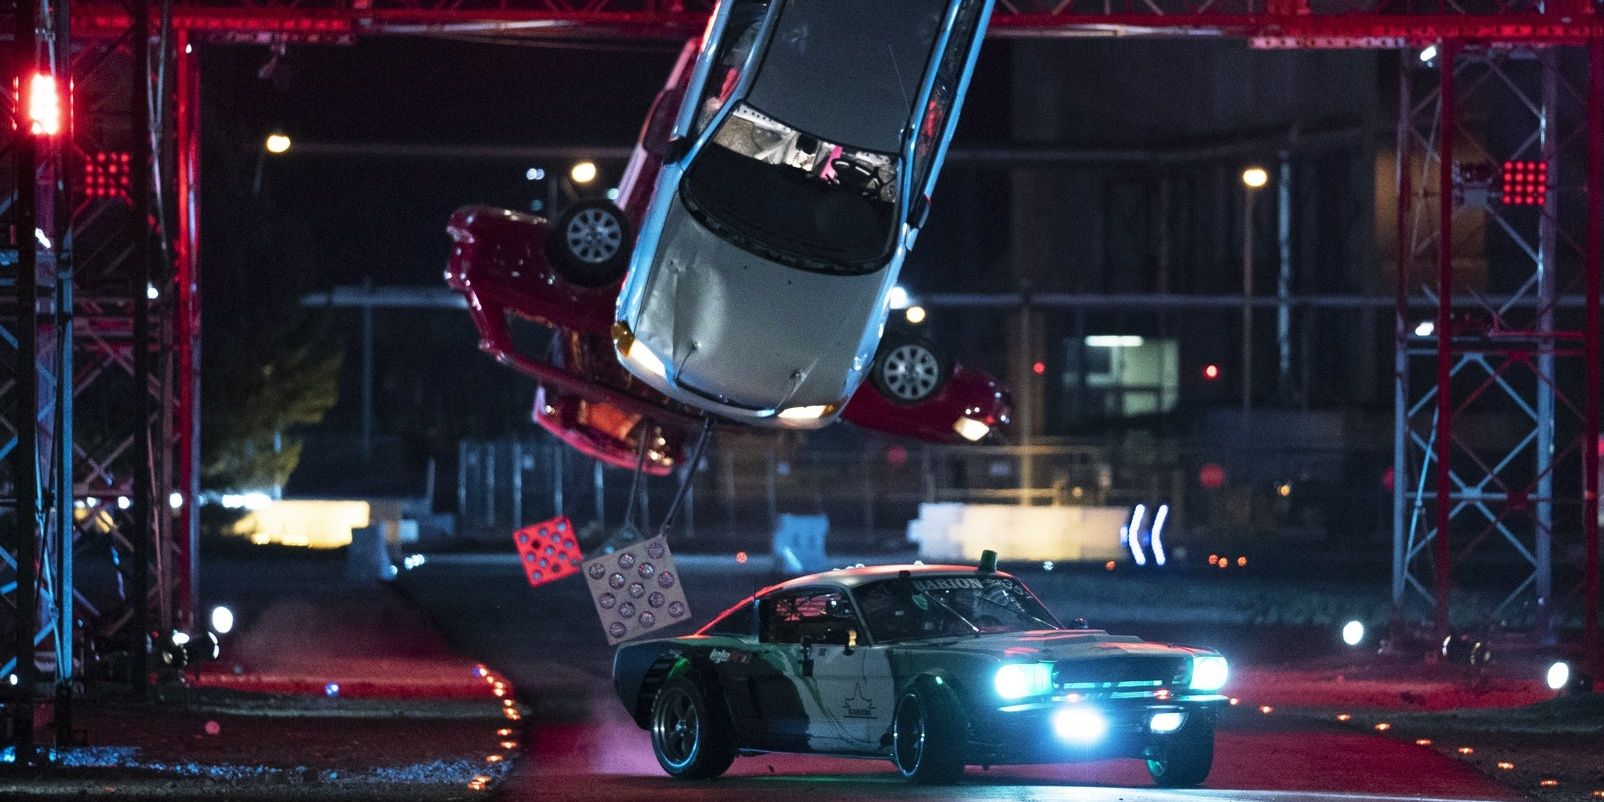 A car maneuvers through an obstacle course, which includes suspended cars, in Netflix's Hyperdrive